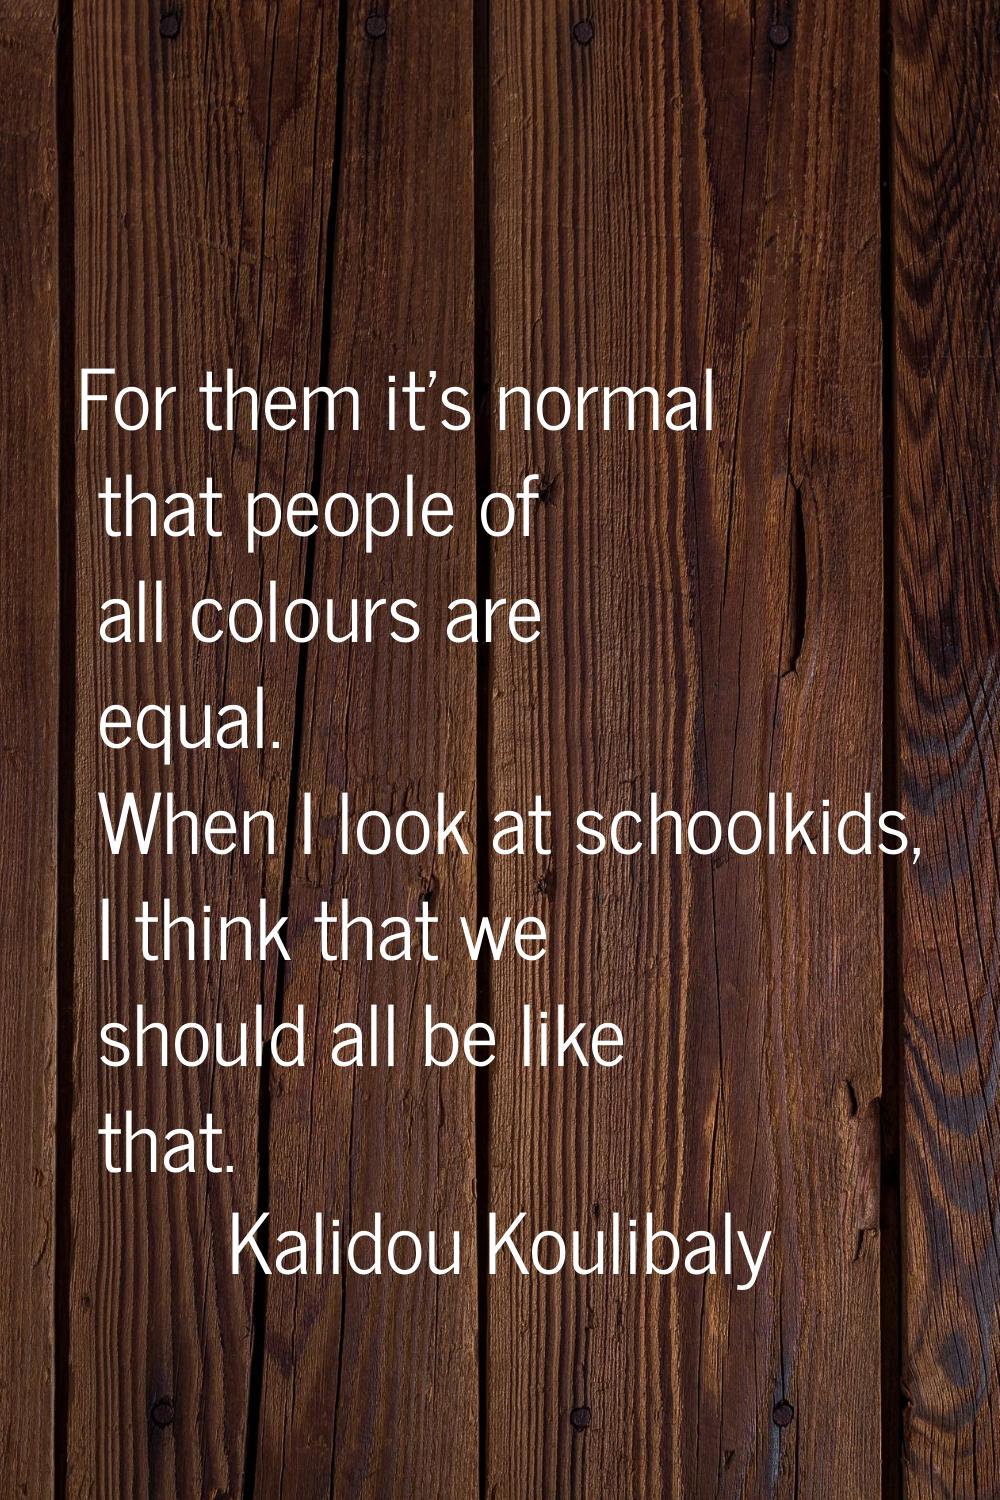 For them it's normal that people of all colours are equal. When I look at schoolkids, I think that 